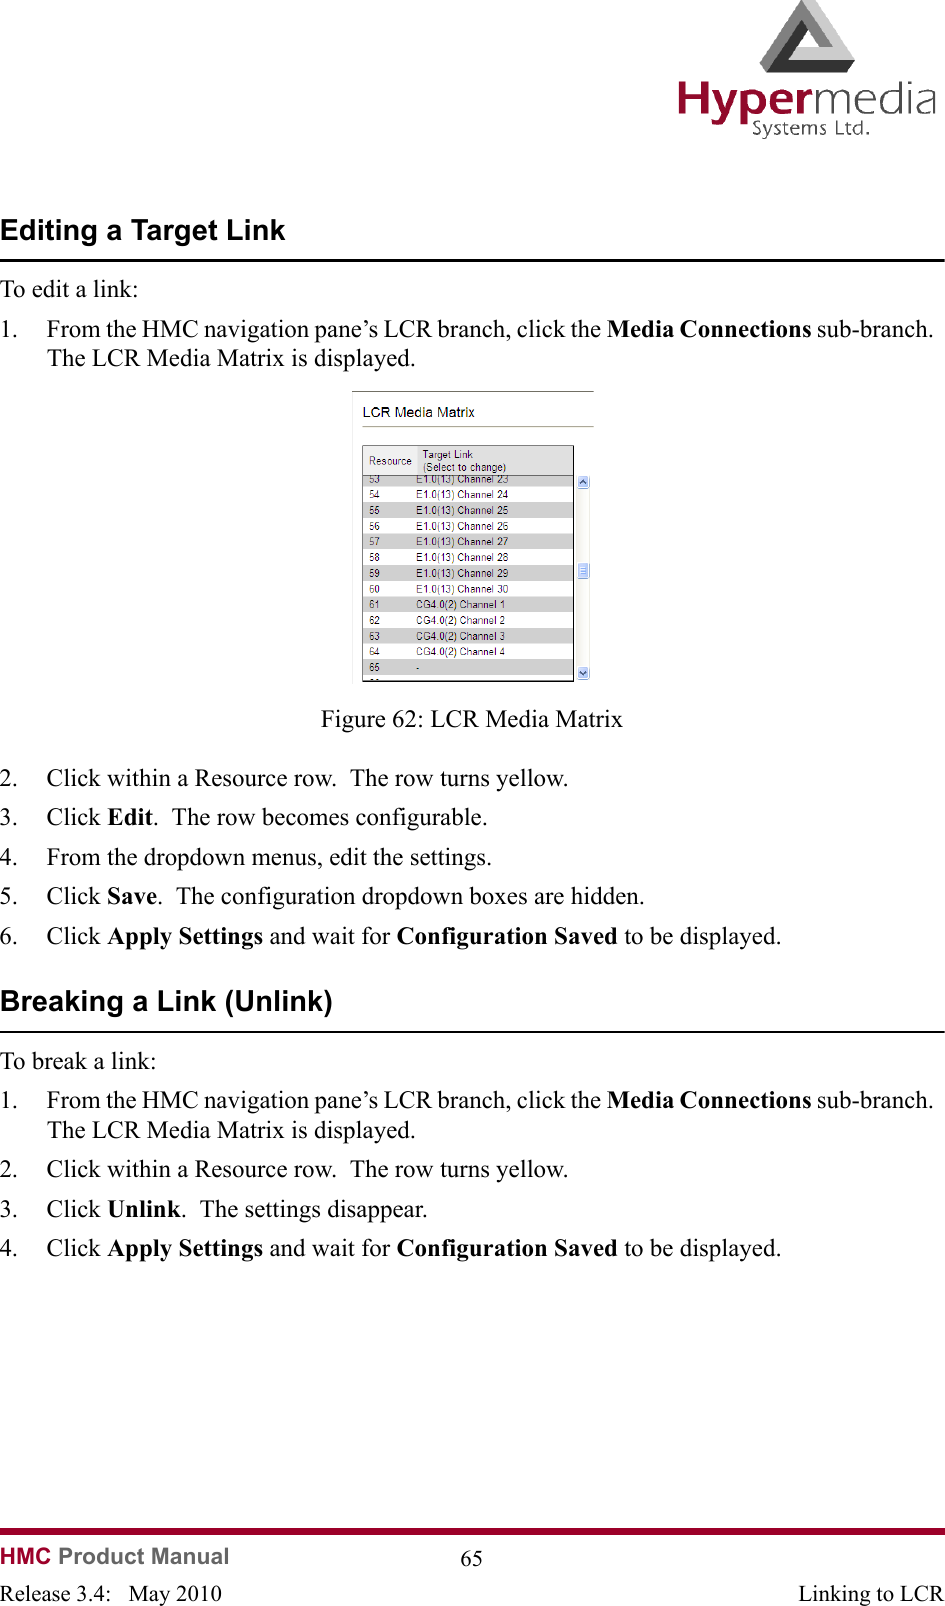 HMC Product Manual  65Release 3.4:   May 2010 Linking to LCREditing a Target LinkTo edit a link:1. From the HMC navigation pane’s LCR branch, click the Media Connections sub-branch.  The LCR Media Matrix is displayed.              Figure 62: LCR Media Matrix2. Click within a Resource row.  The row turns yellow.3. Click Edit.  The row becomes configurable.4. From the dropdown menus, edit the settings.5. Click Save.  The configuration dropdown boxes are hidden.6. Click Apply Settings and wait for Configuration Saved to be displayed.Breaking a Link (Unlink)To break a link:1. From the HMC navigation pane’s LCR branch, click the Media Connections sub-branch.  The LCR Media Matrix is displayed.2. Click within a Resource row.  The row turns yellow.3. Click Unlink.  The settings disappear.4. Click Apply Settings and wait for Configuration Saved to be displayed.